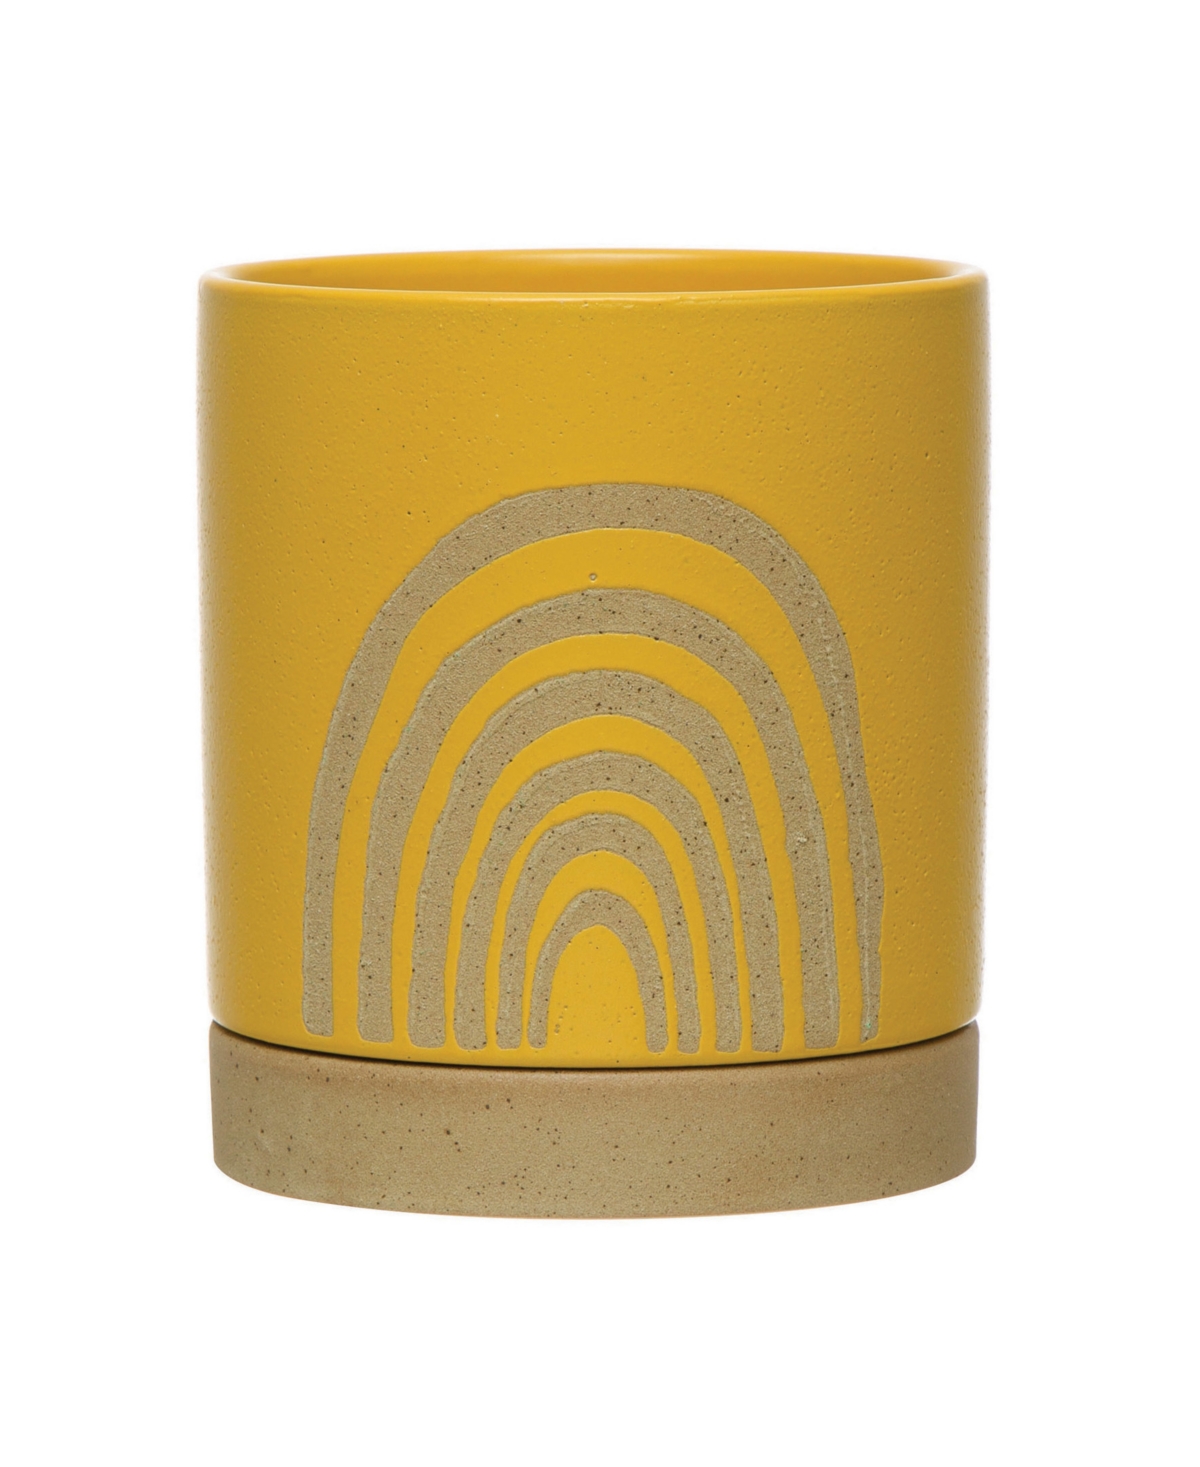 Stoneware Planter with Saucer Rainbow, Set of 2 Holds 5" - Yellow